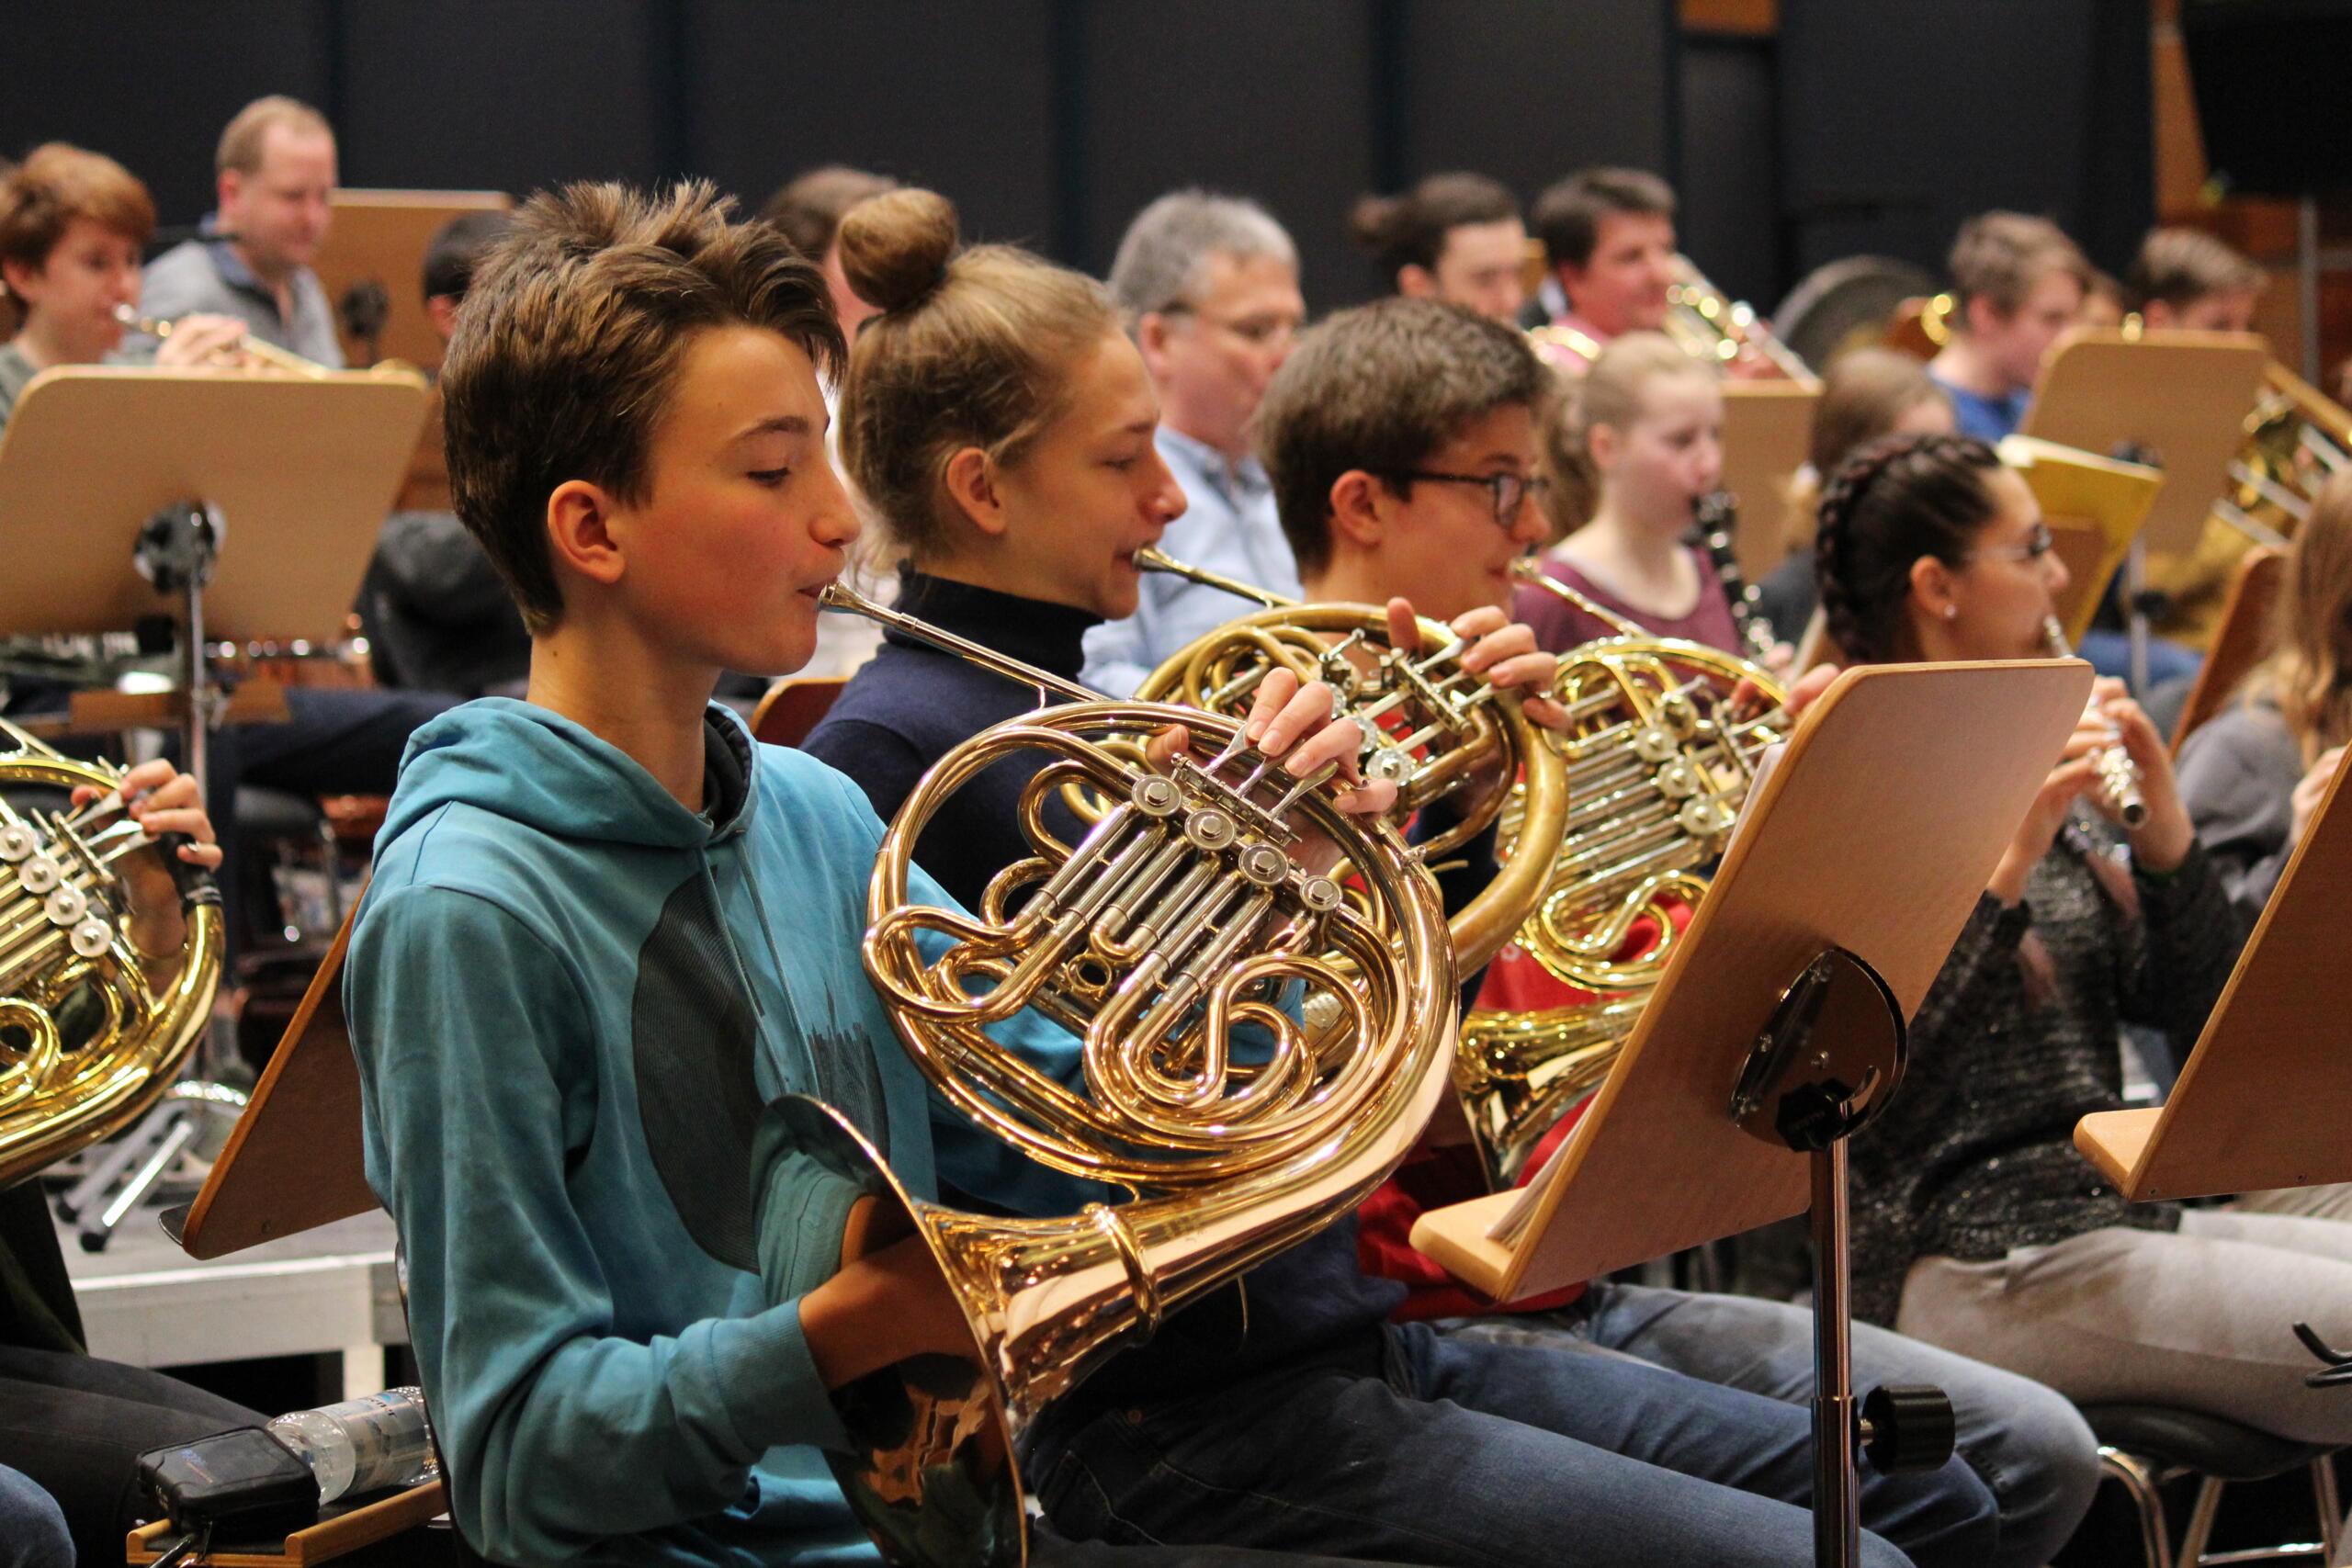 Pupils rehearse for the final concert of Klasse Klassik, in the foreground a young horn player.